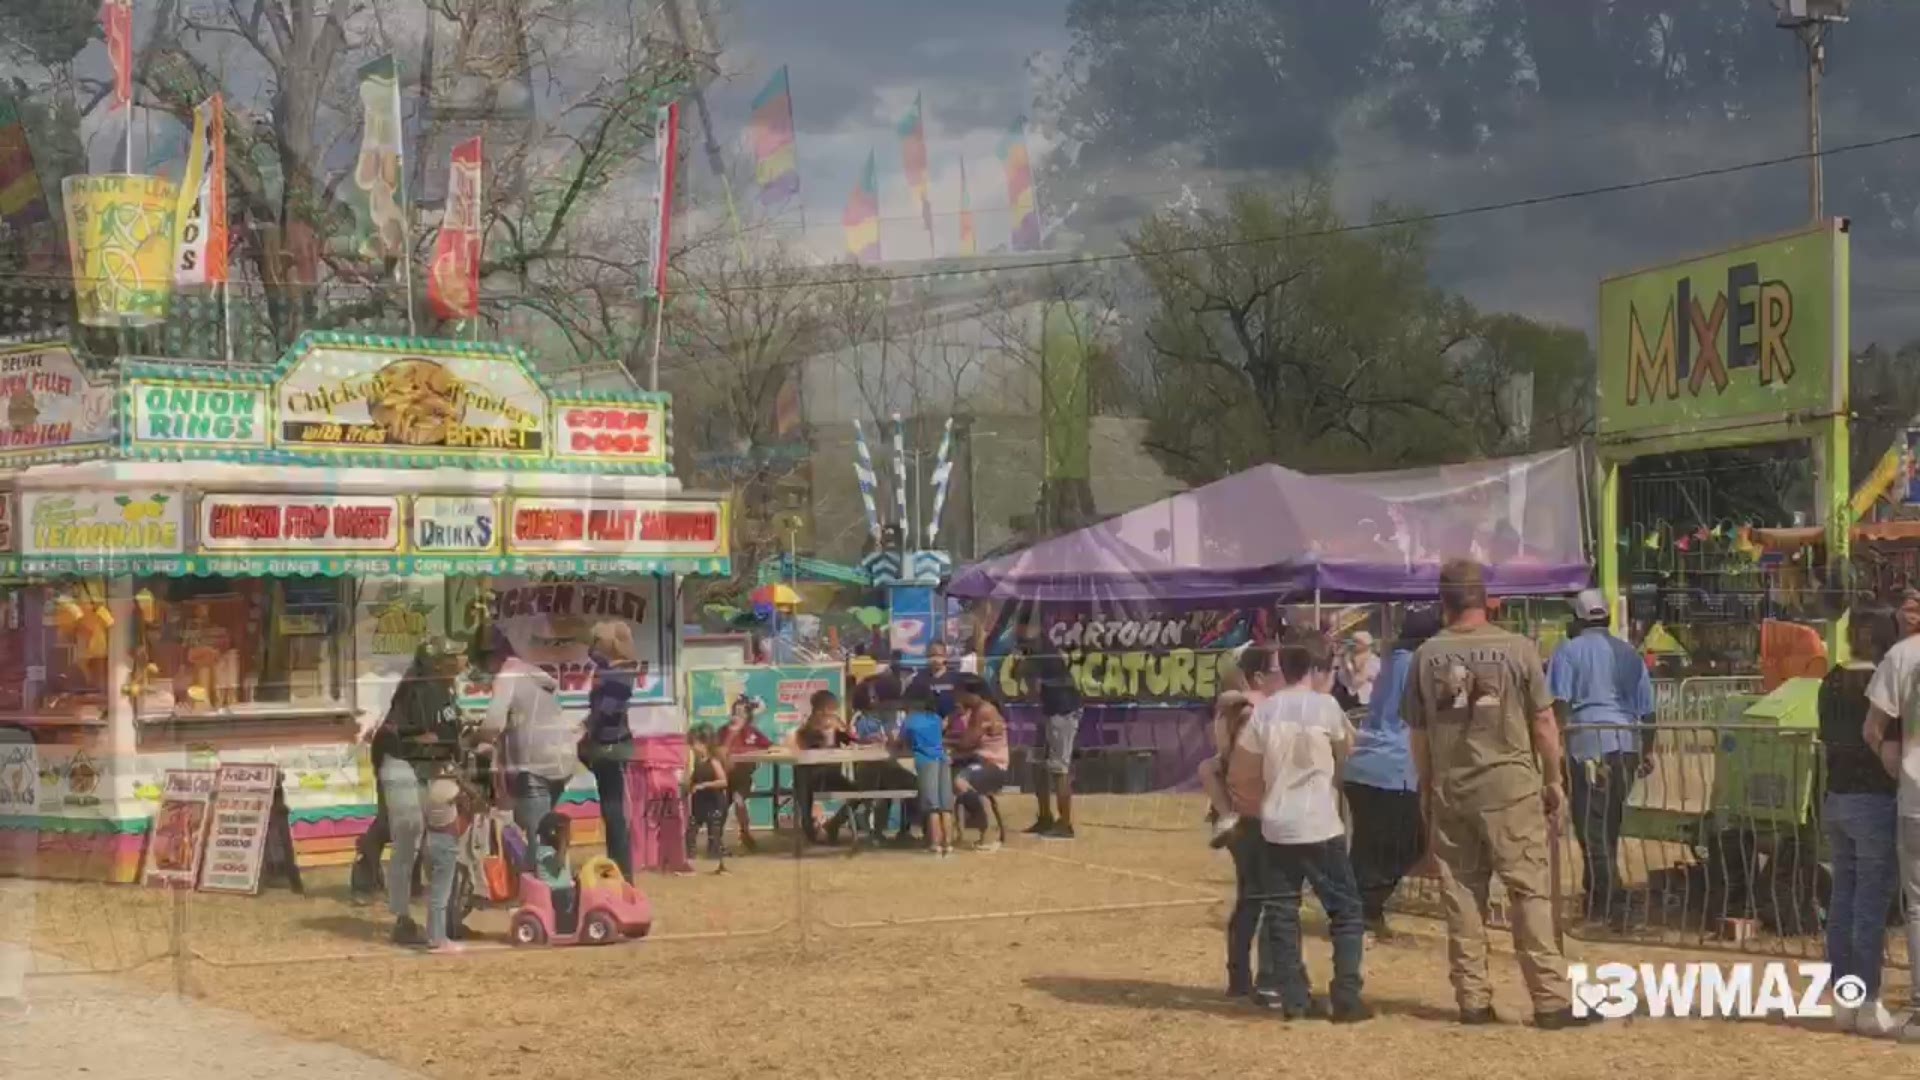 A look at the rides and fair food available inside Central City Park